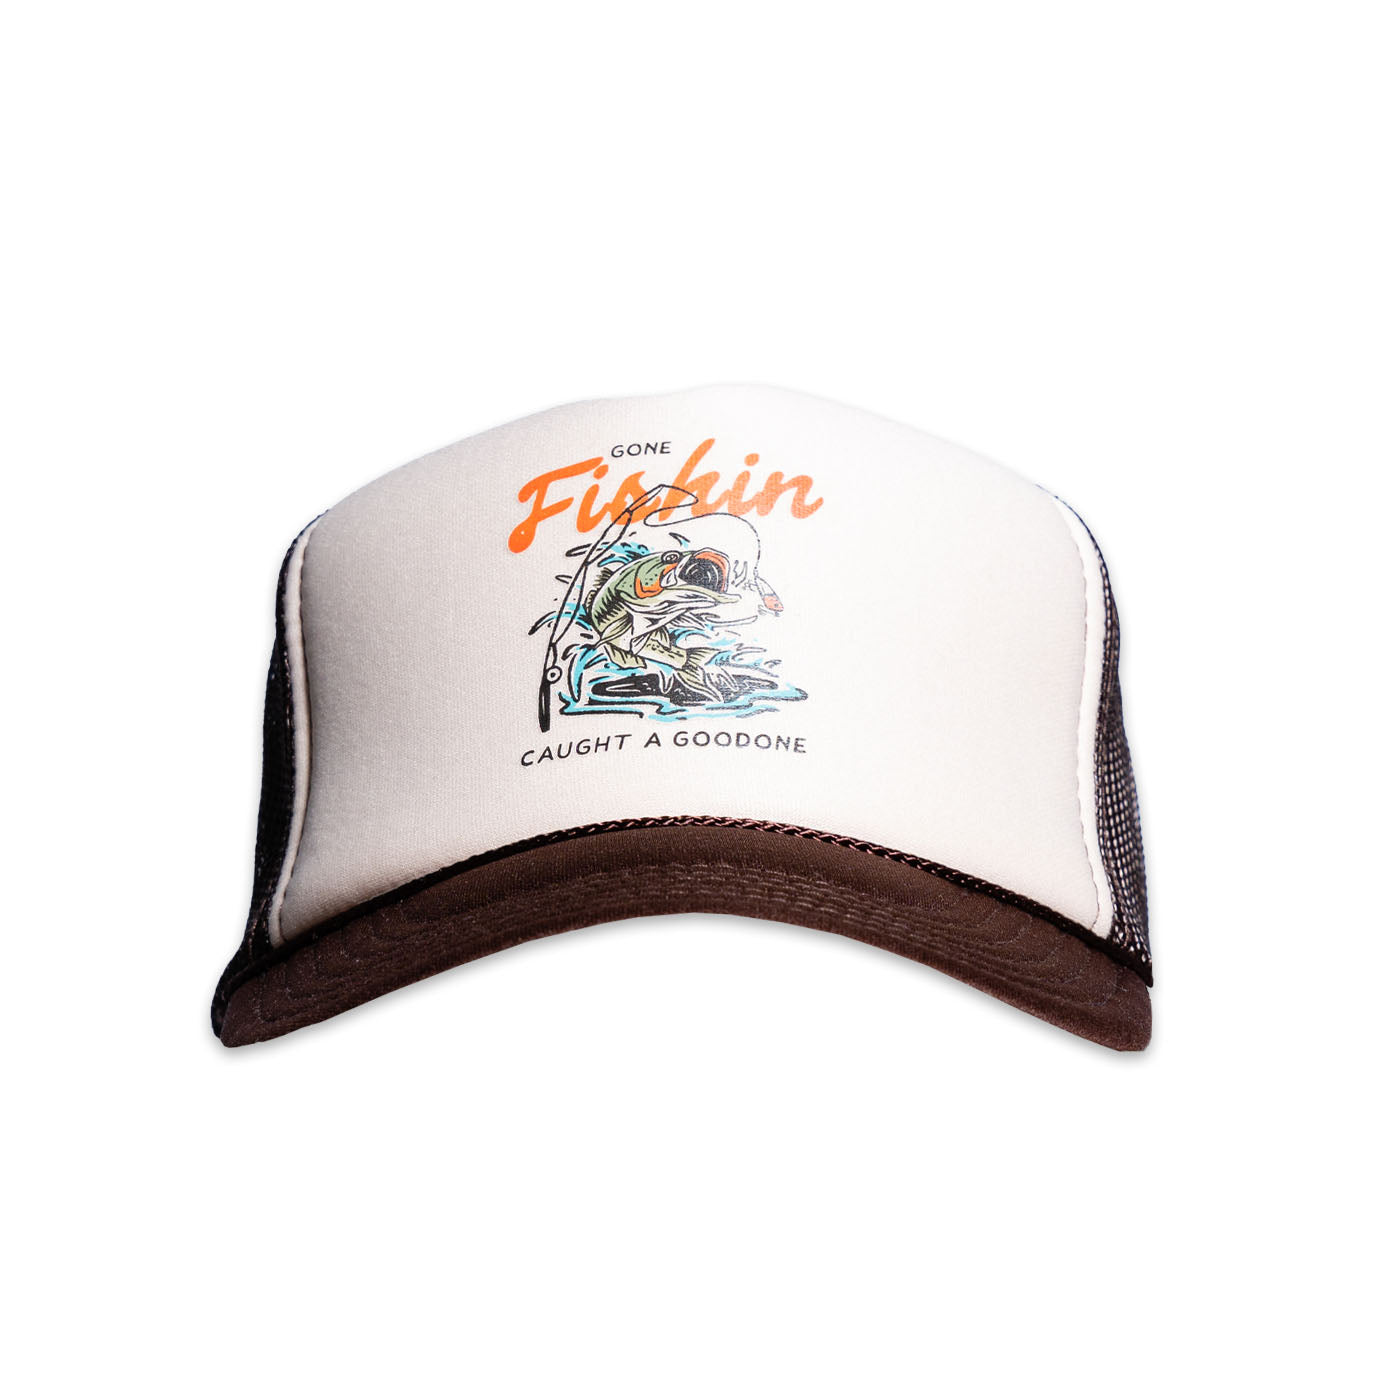 Fisher Hat